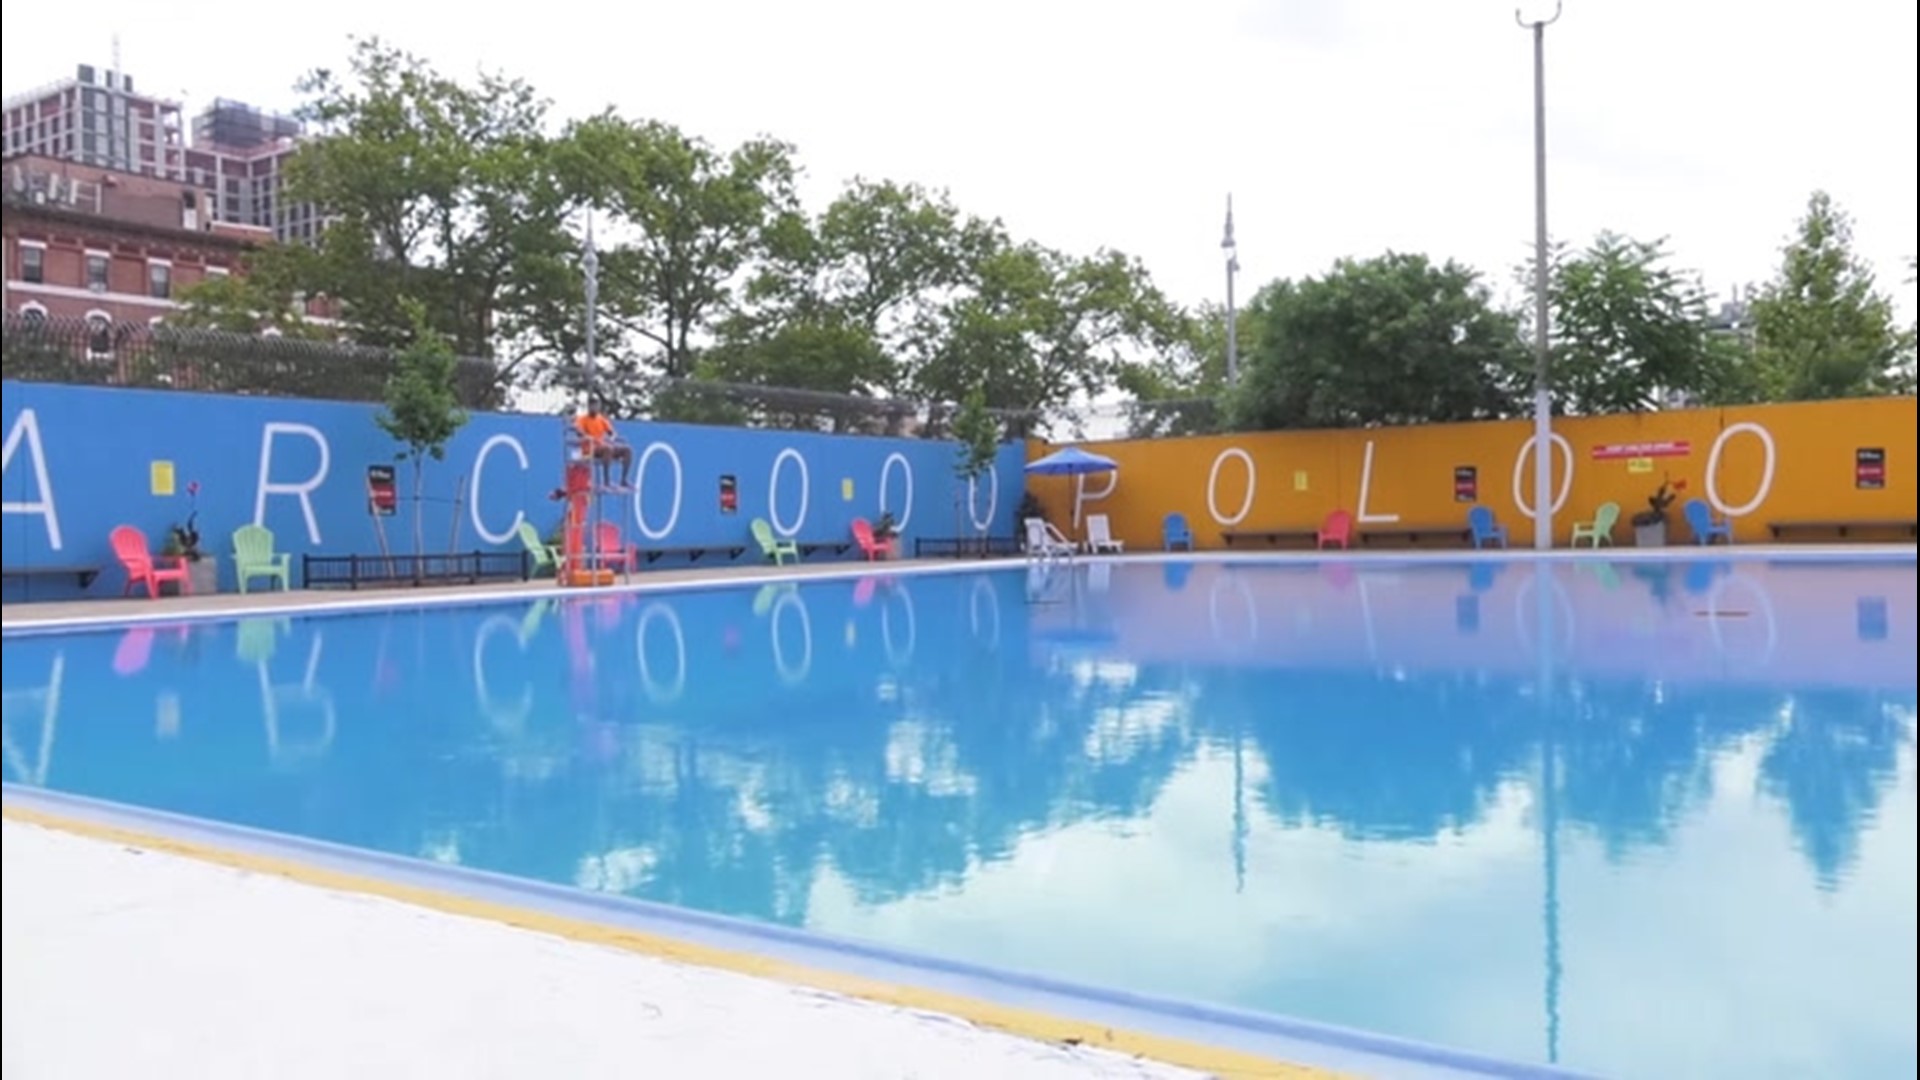 NYC public pools set to reopen